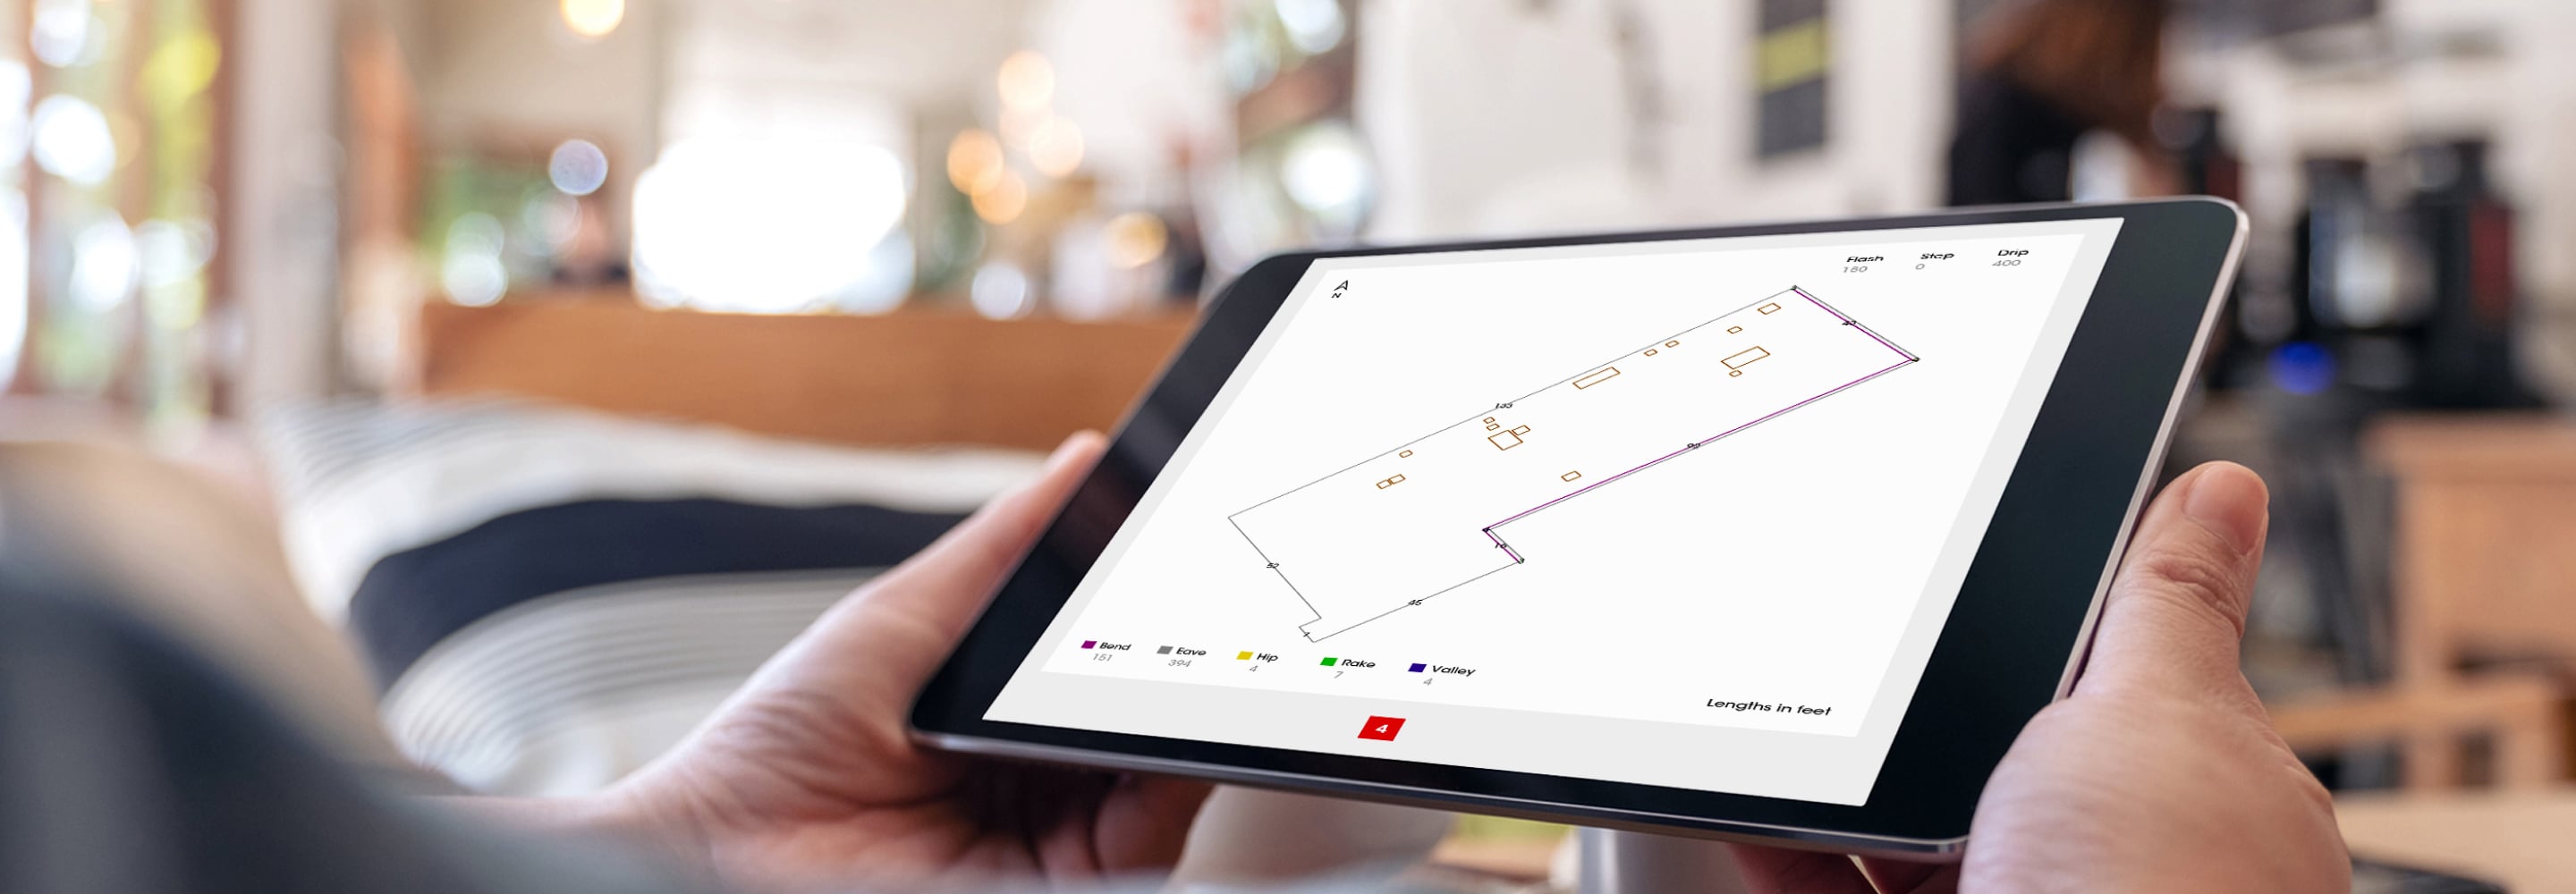 Person viewing house layout from QuickMeasure on a tablet.